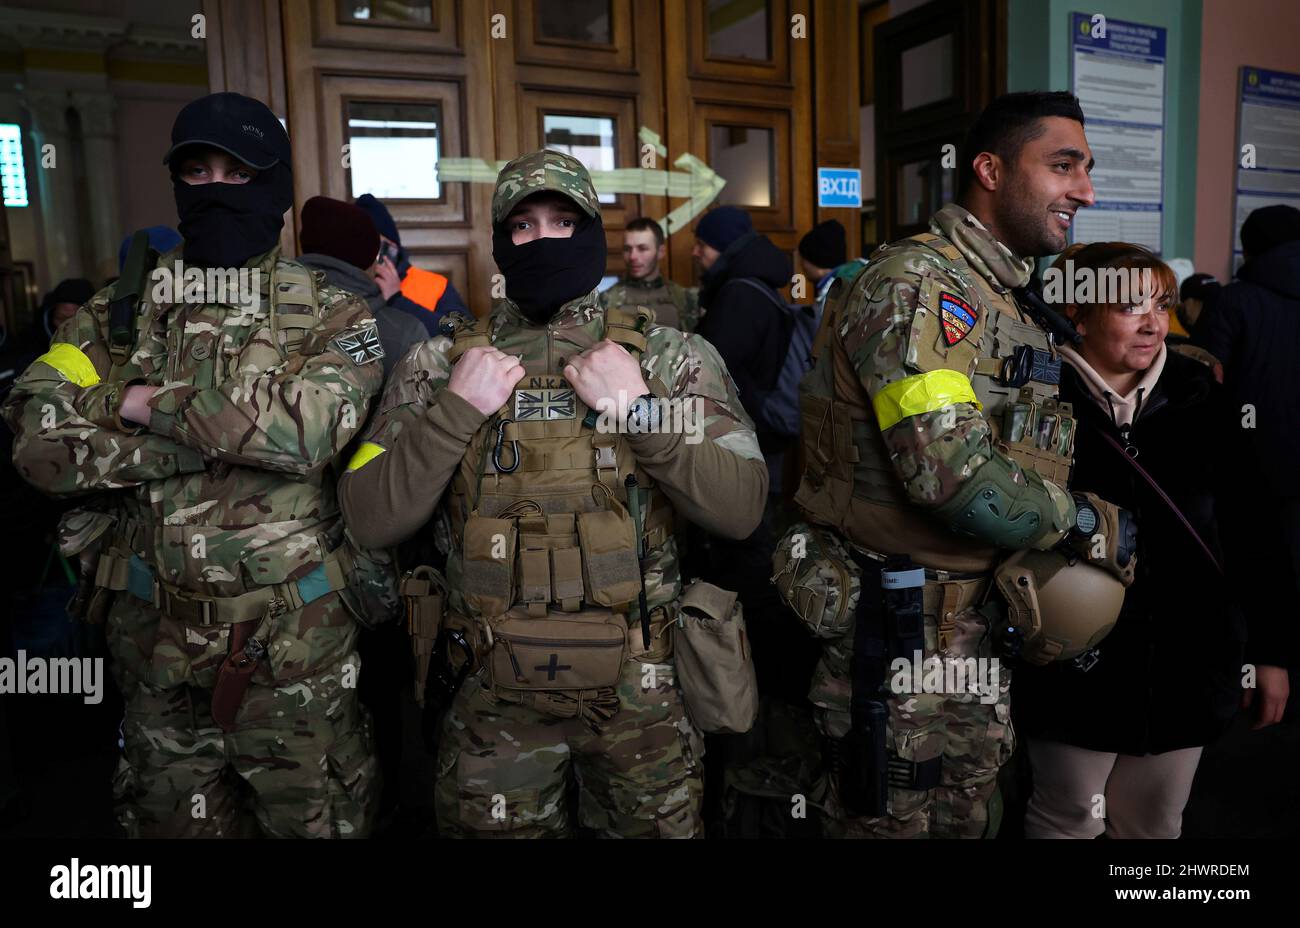 Foreign fighters from the UK asked to be identified as 'Scouser', 'Jacks' and 'Ben Grant' pose for a picture as they are ready to depart towards the front line in the east of Ukraine following the Russian invasion, at the main train station in Lviv, Ukraine, March 5, 2022. Picture taken March 5, 2022.   REUTERS/Kai Pfaffenbach Stock Photo